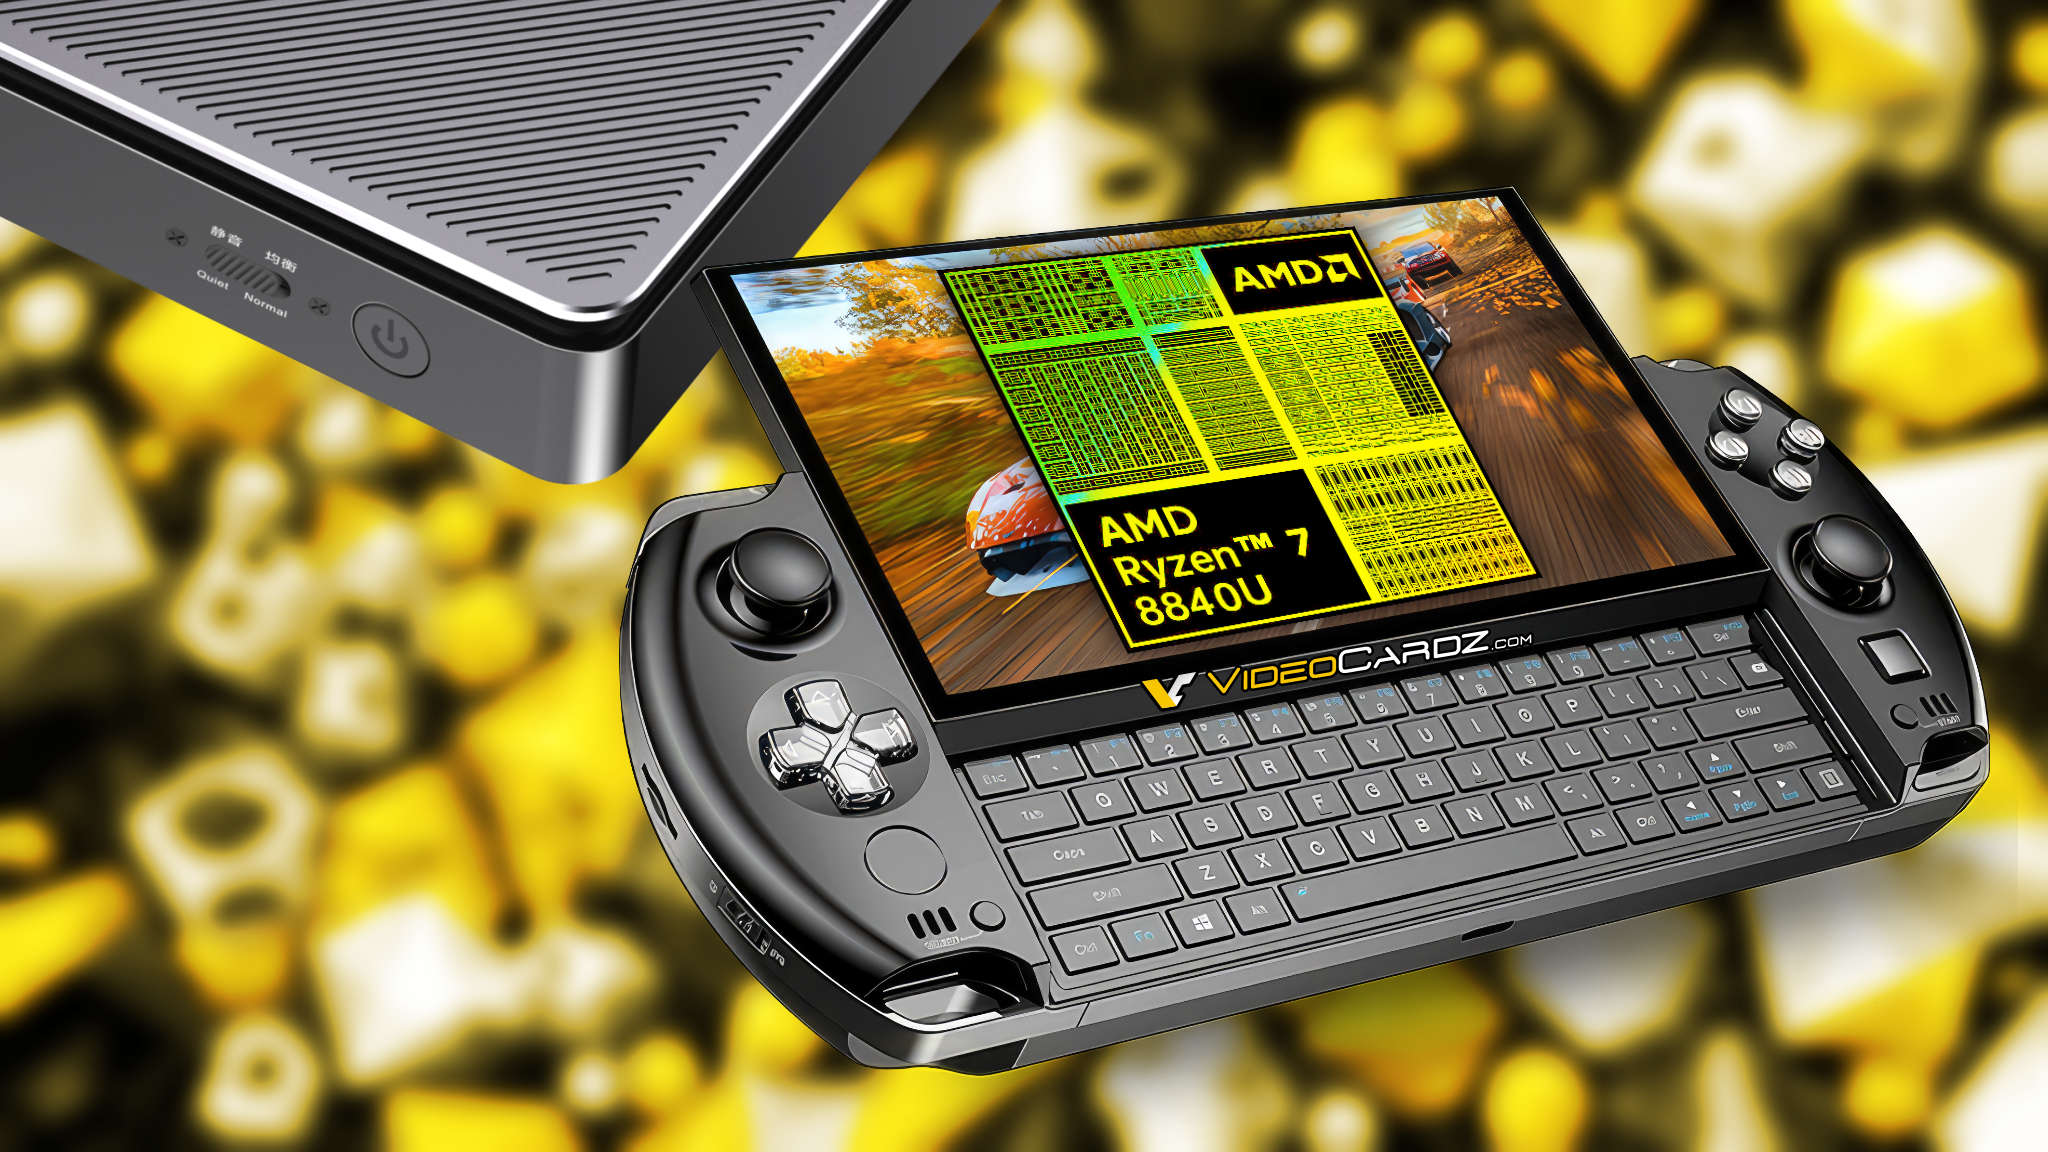 GPD Win 4 (8840U) handheld to launch by the end of this month, GPD 